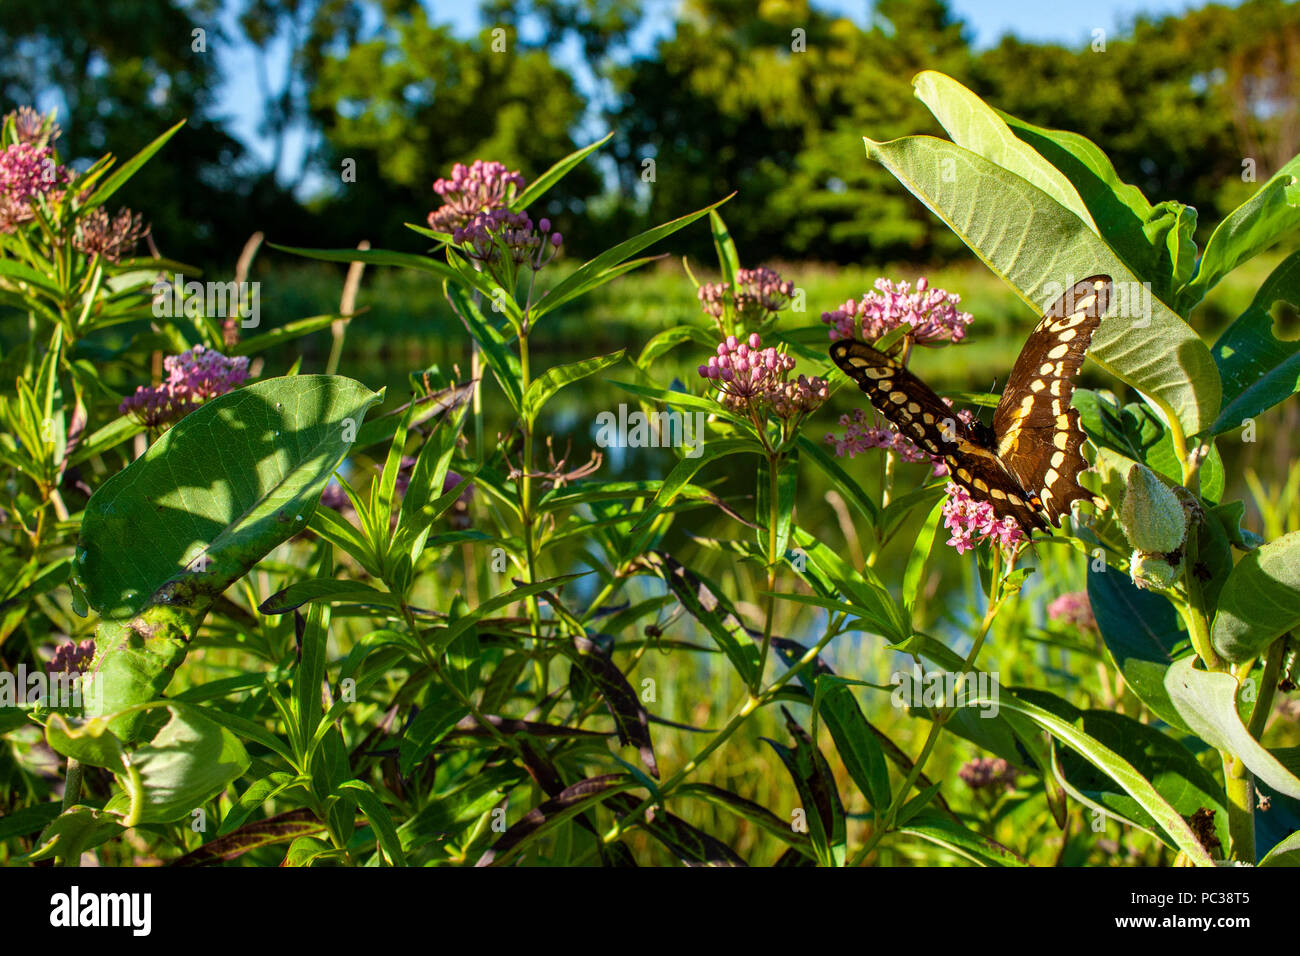 A giant swallowtail feeds on a swamp milkweed along a pond with a common milkweed on the right side. Stock Photo